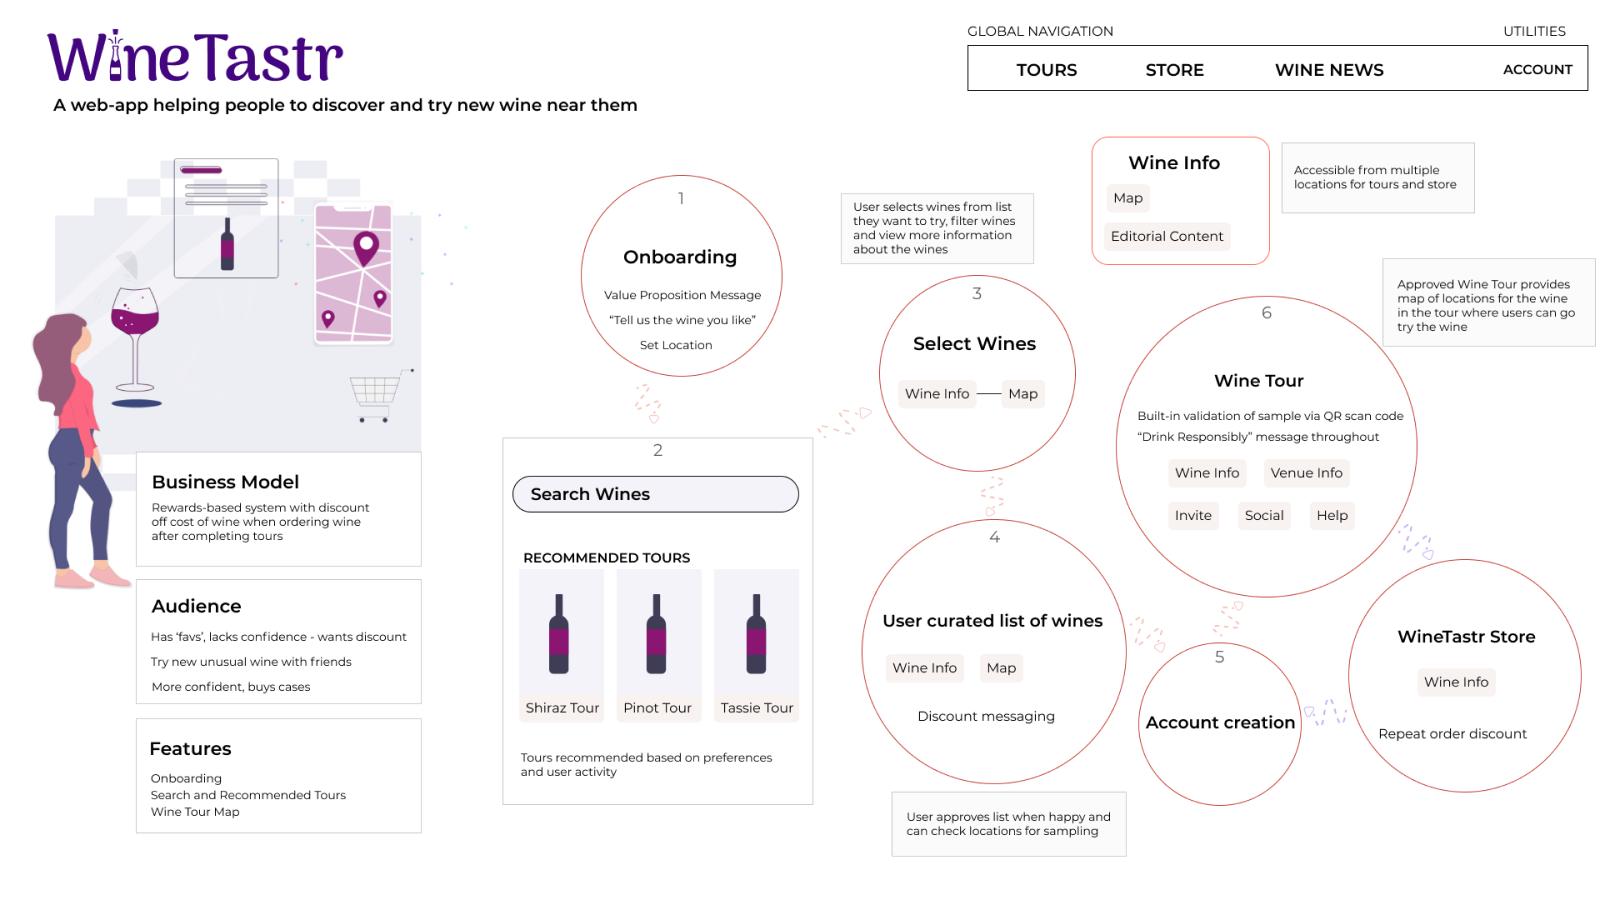 WineTastr ecosystem: Onboarding, Tour Creation and Tour Map